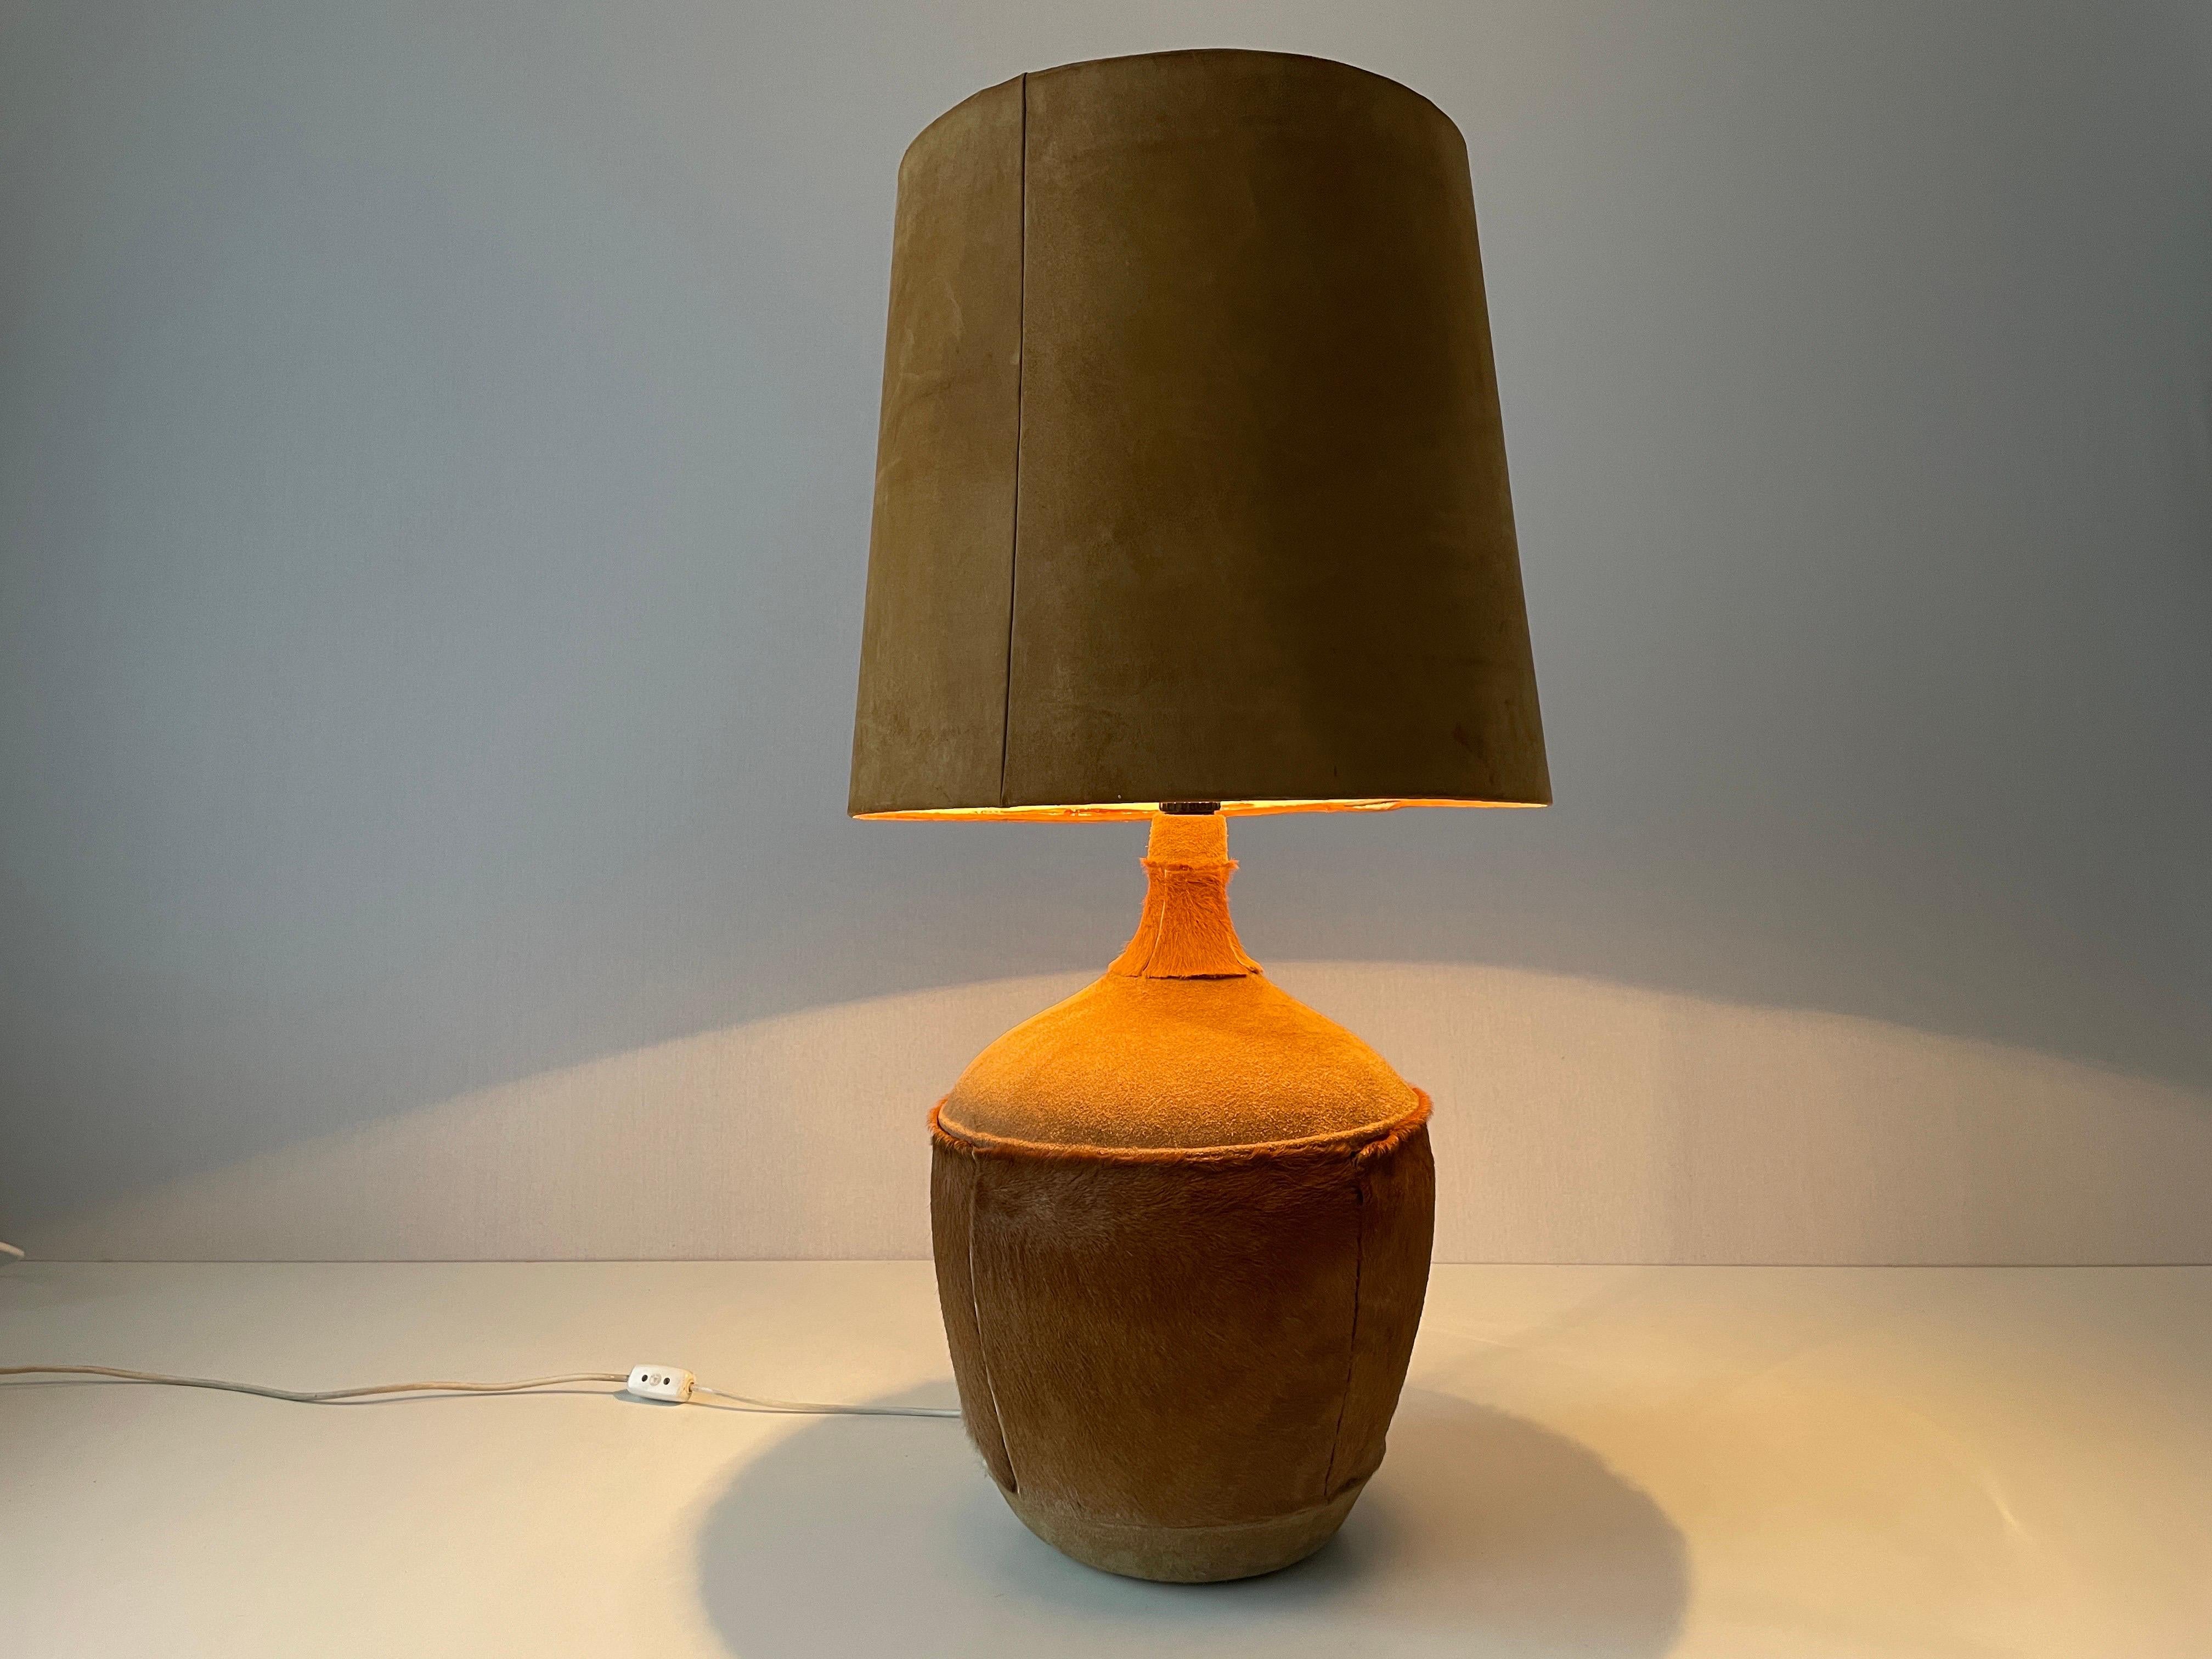 Tan Suede Leather and Glass Shade Floor or Table Lamp, 1960s, Denmark For Sale 3